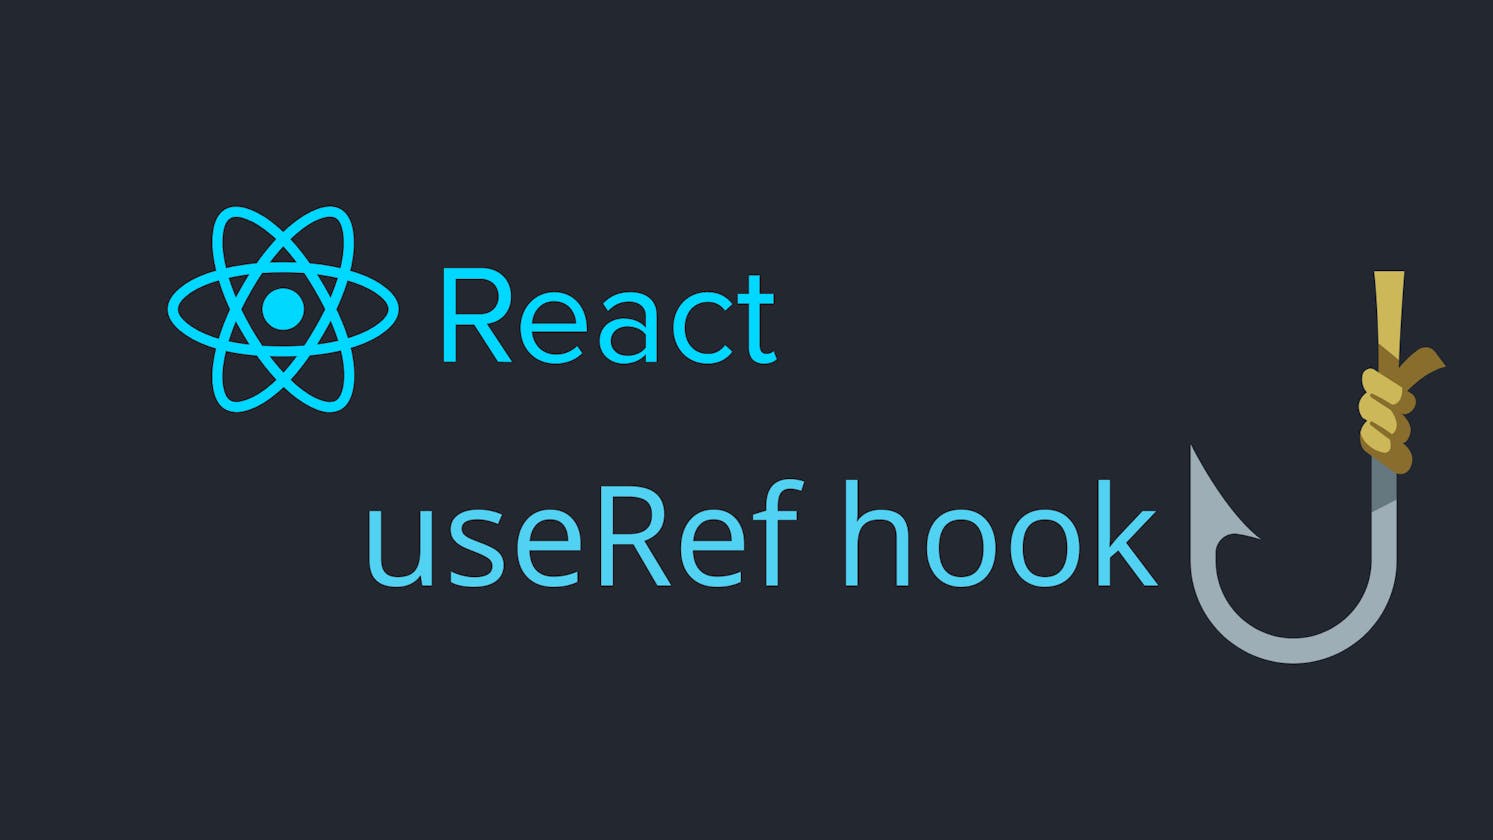 An easy guide to understanding react useRef hook